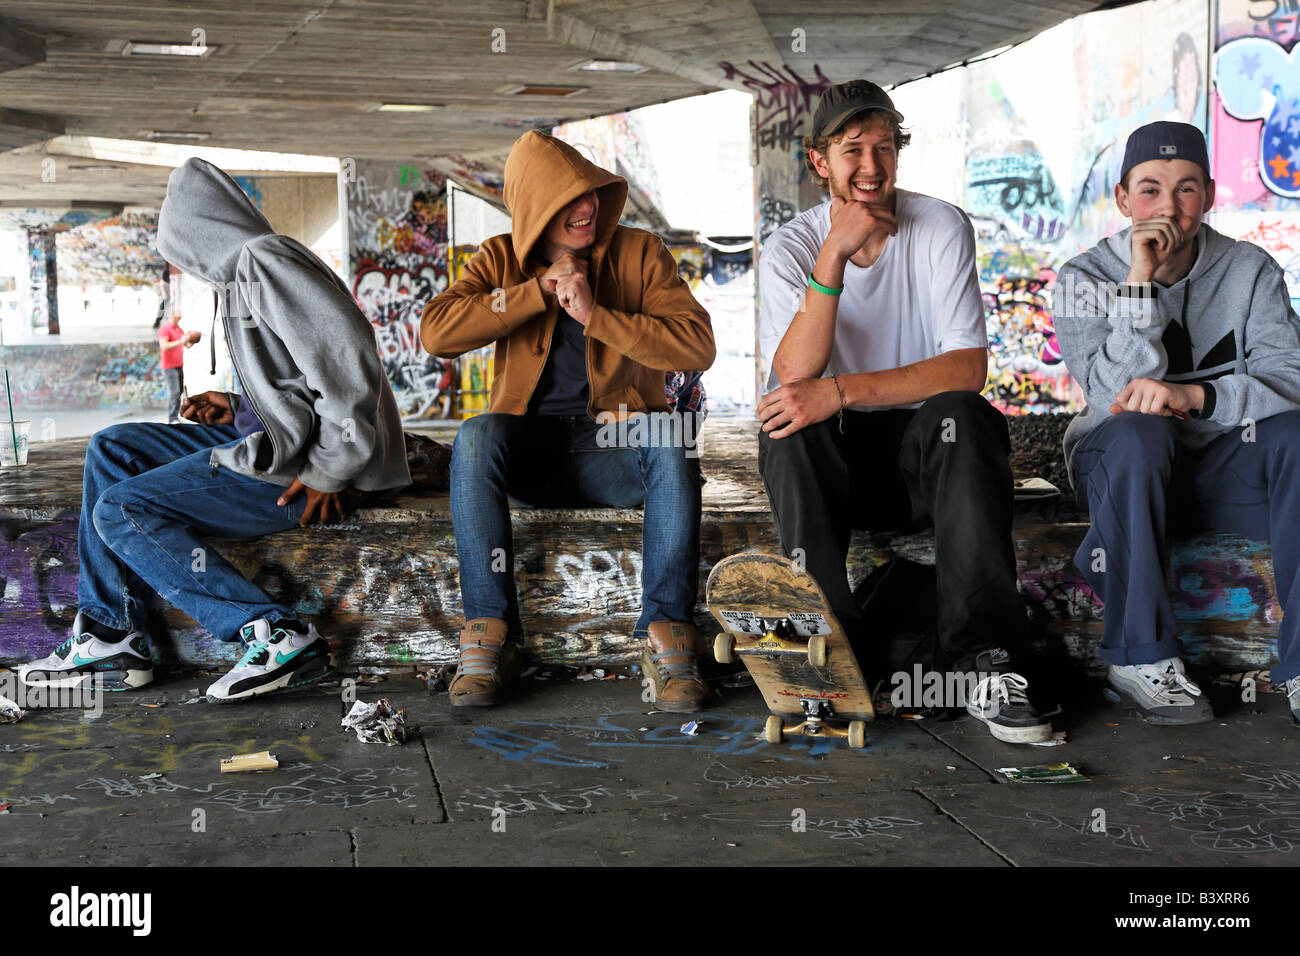 Skateboarders And Hoodies At The Skateboard Centre South Bank London UK Europe Stock Photo